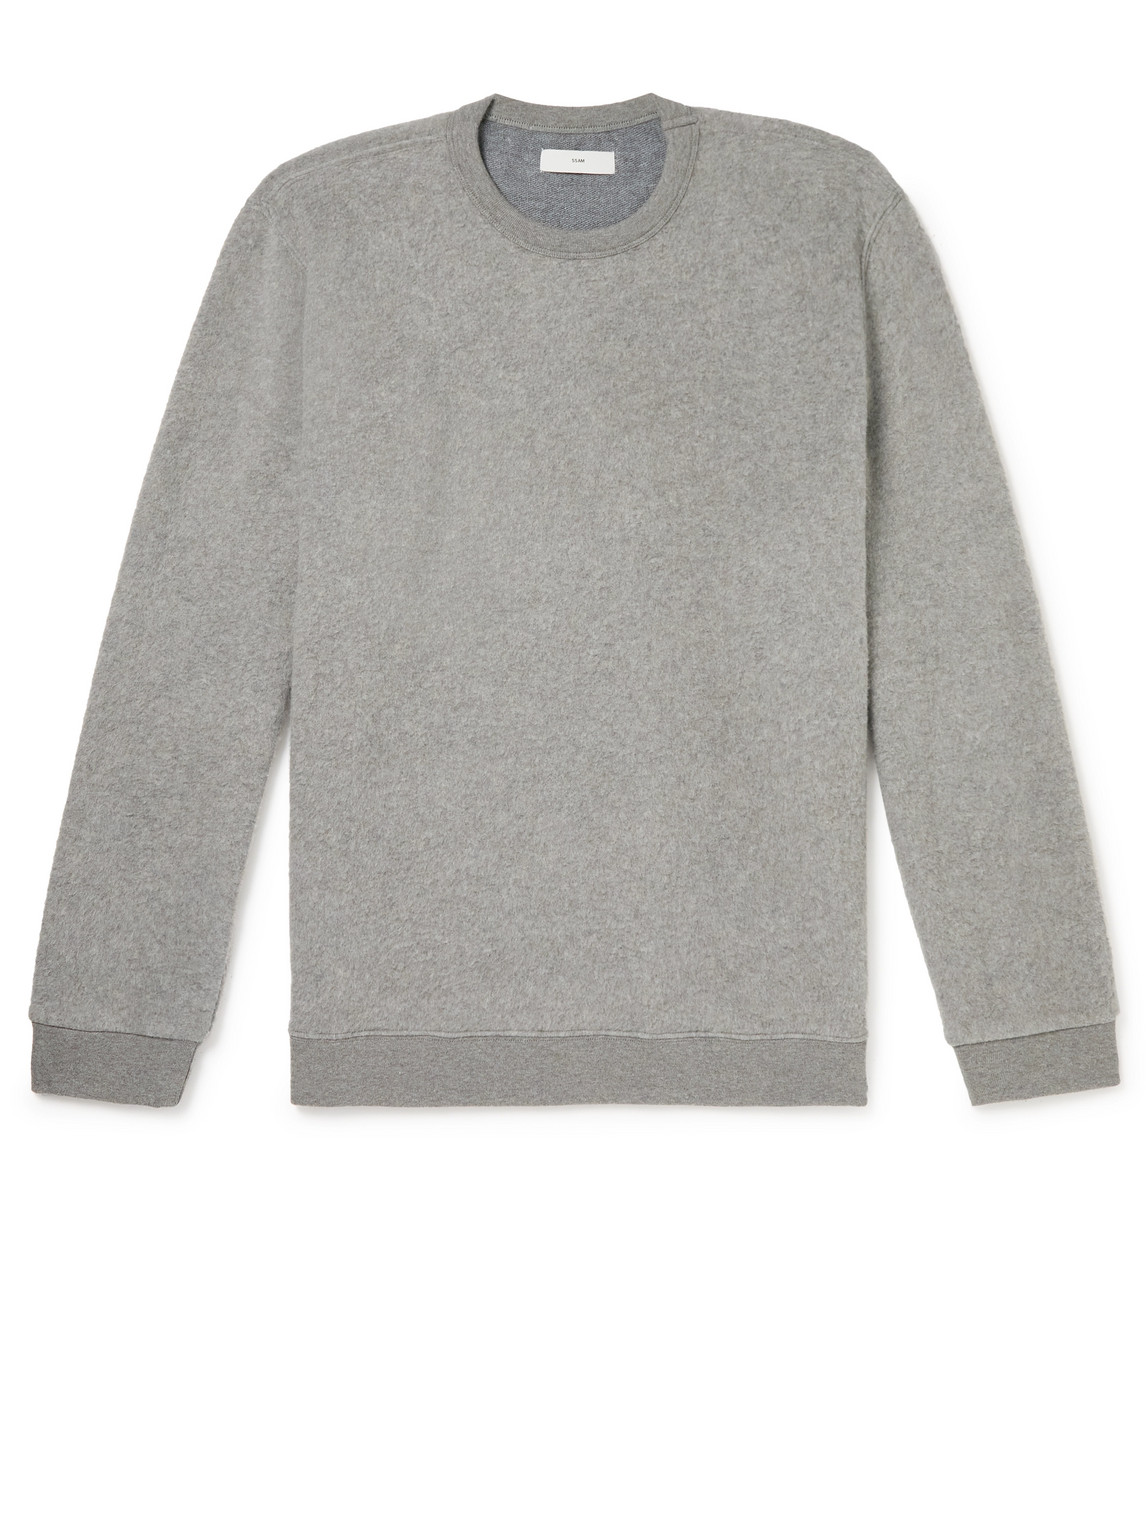 Andy Brushed Cotton and Camel Hair-Blend Sweatshirt